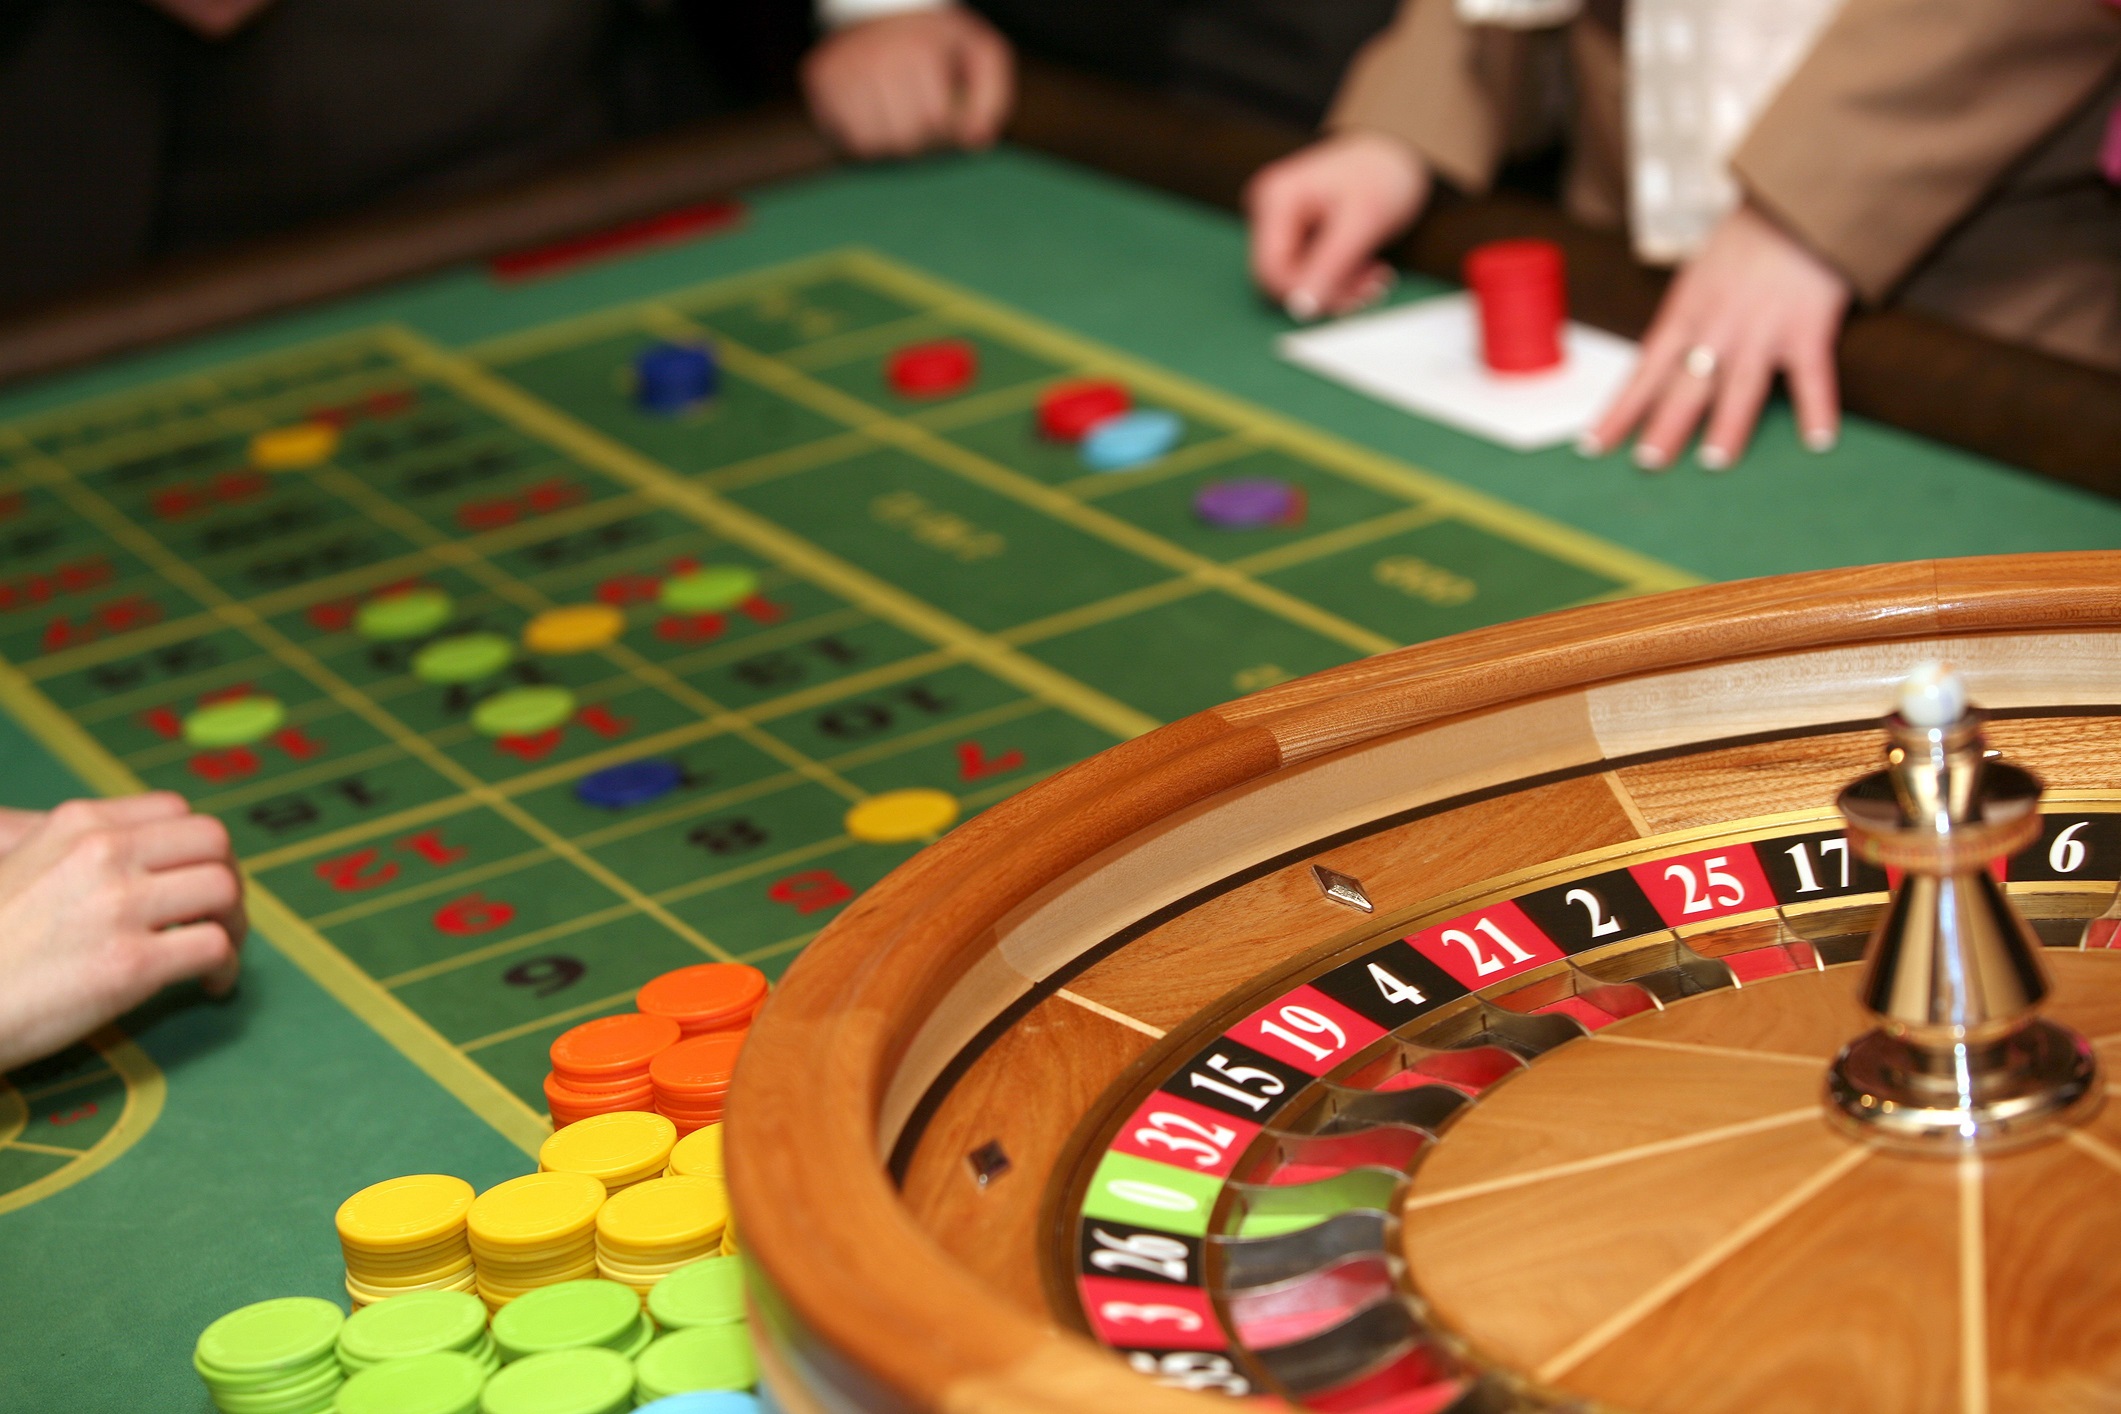 Strategic Play - Maximizing Your Chances of Winning in Online Casino Games